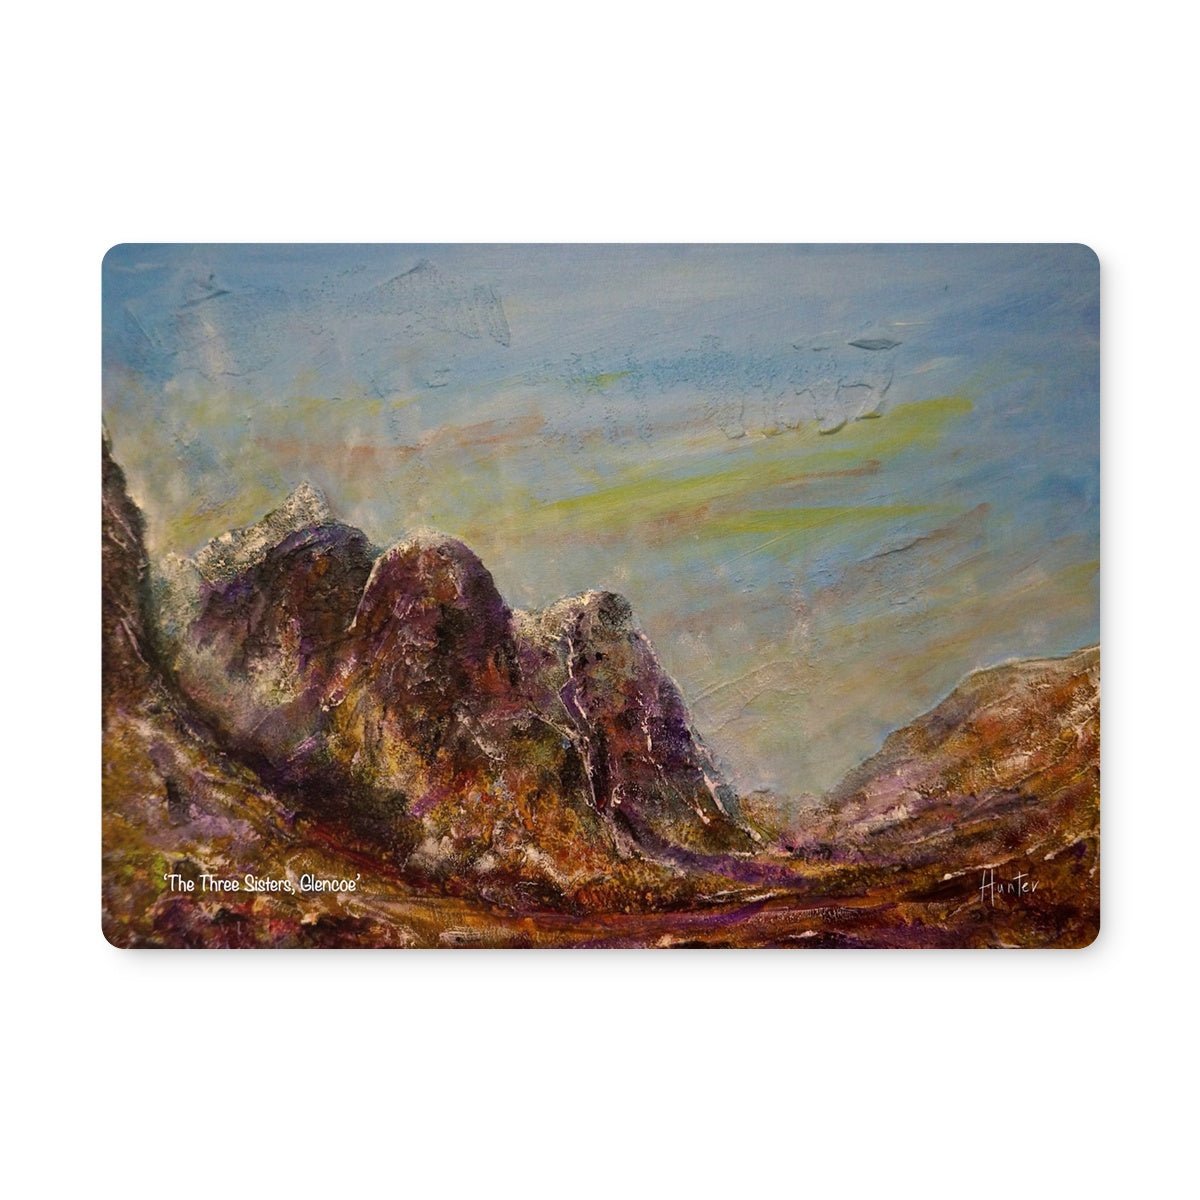 Three Sisters Glencoe Art Gifts Placemat-Placemats-Glencoe Art Gallery-2 Placemats-Paintings, Prints, Homeware, Art Gifts From Scotland By Scottish Artist Kevin Hunter